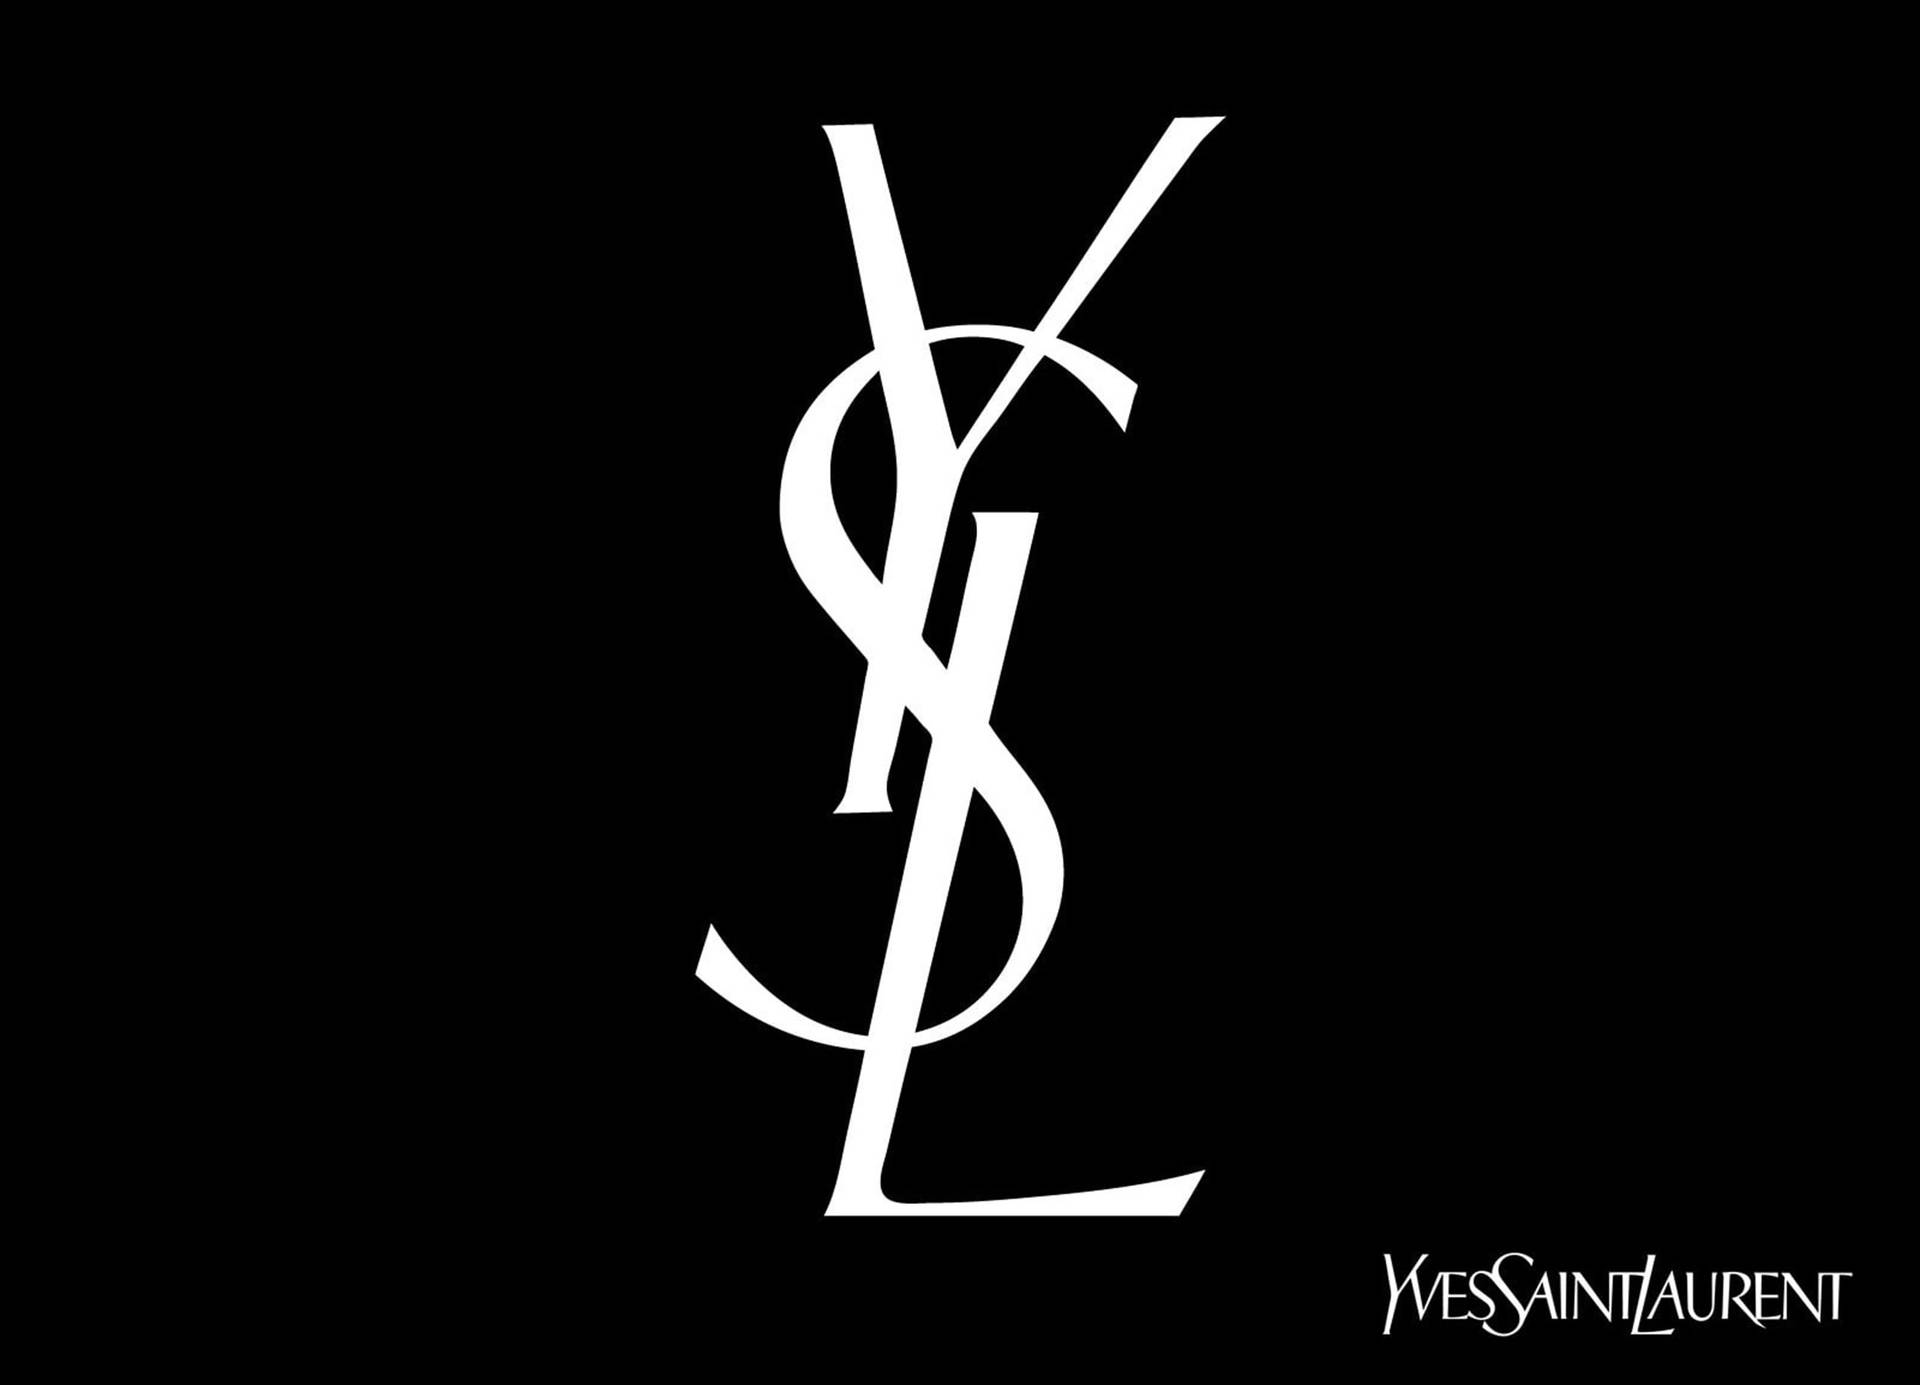 Free Ysl Wallpaper Downloads 100 Ysl Wallpapers For Free Wallpapers Com